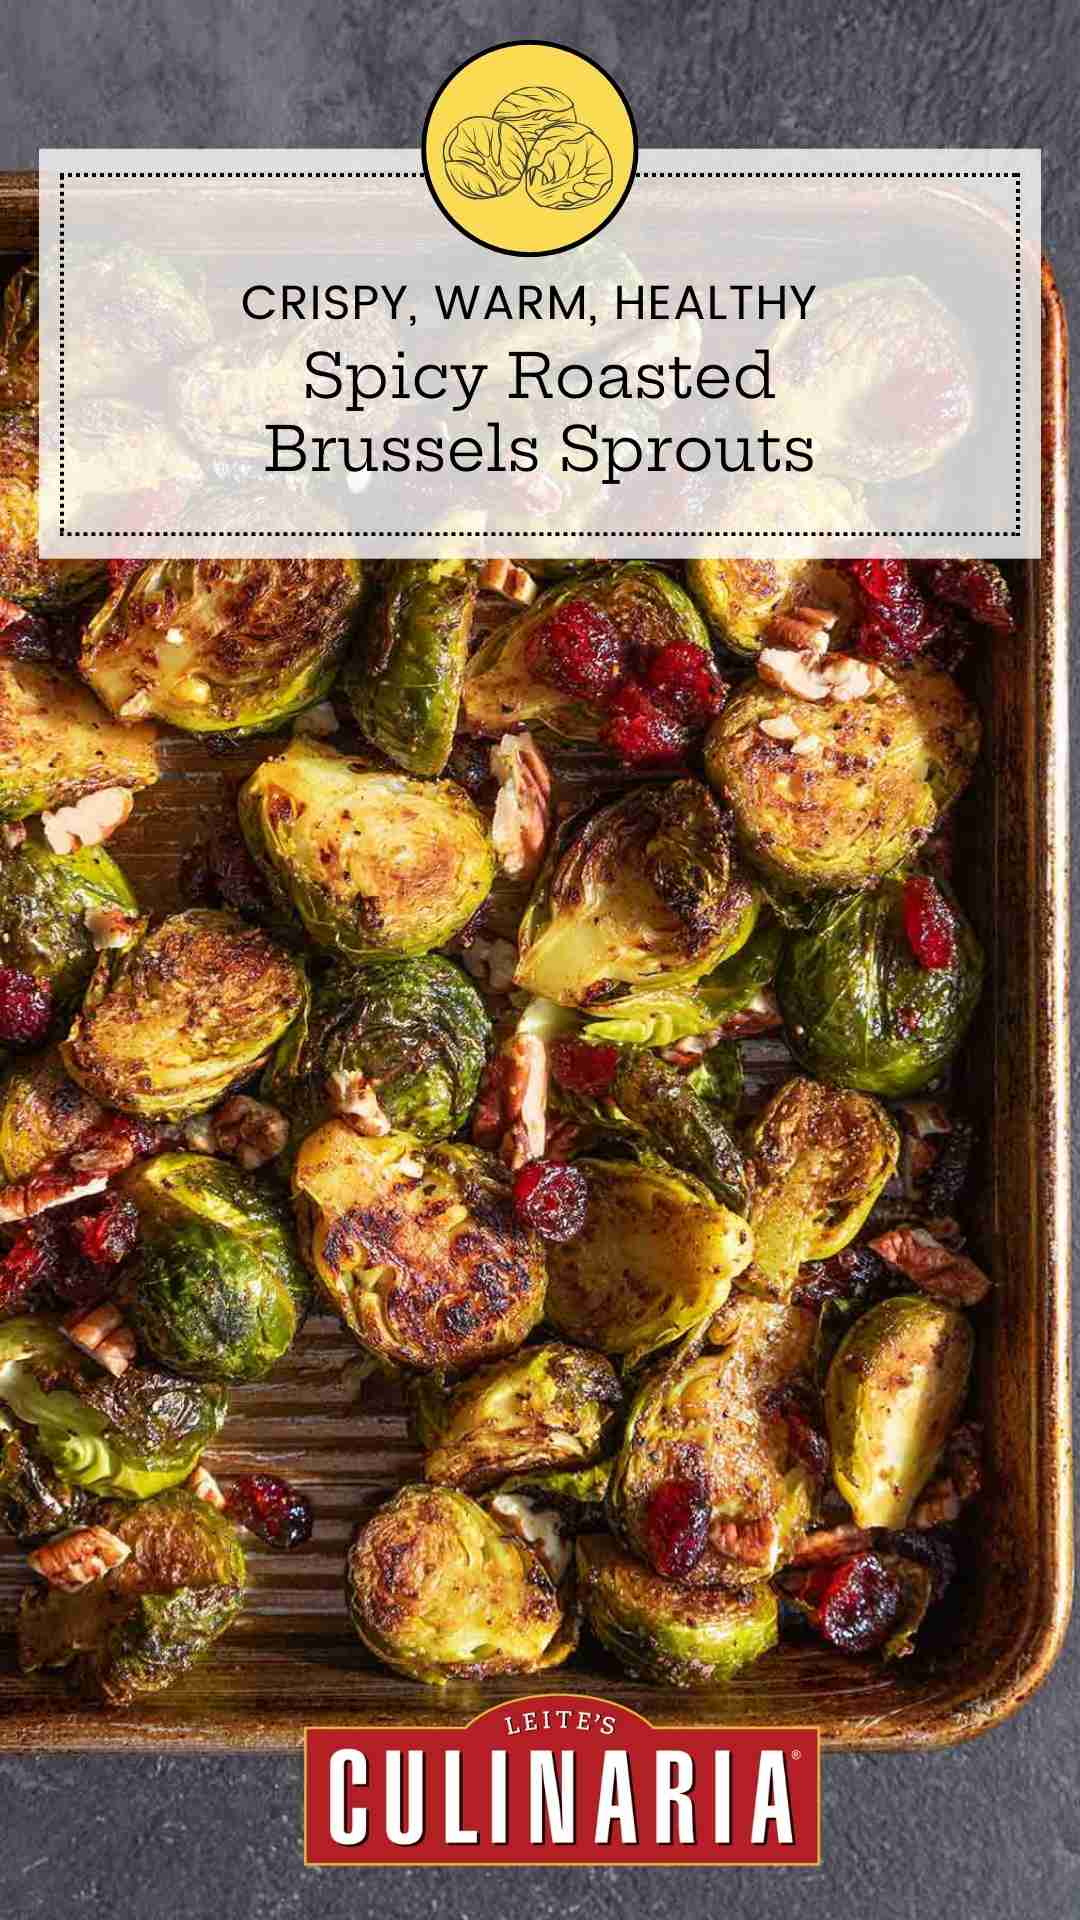 A tray of roasted Brussels sprouts with cranberries and pecans.